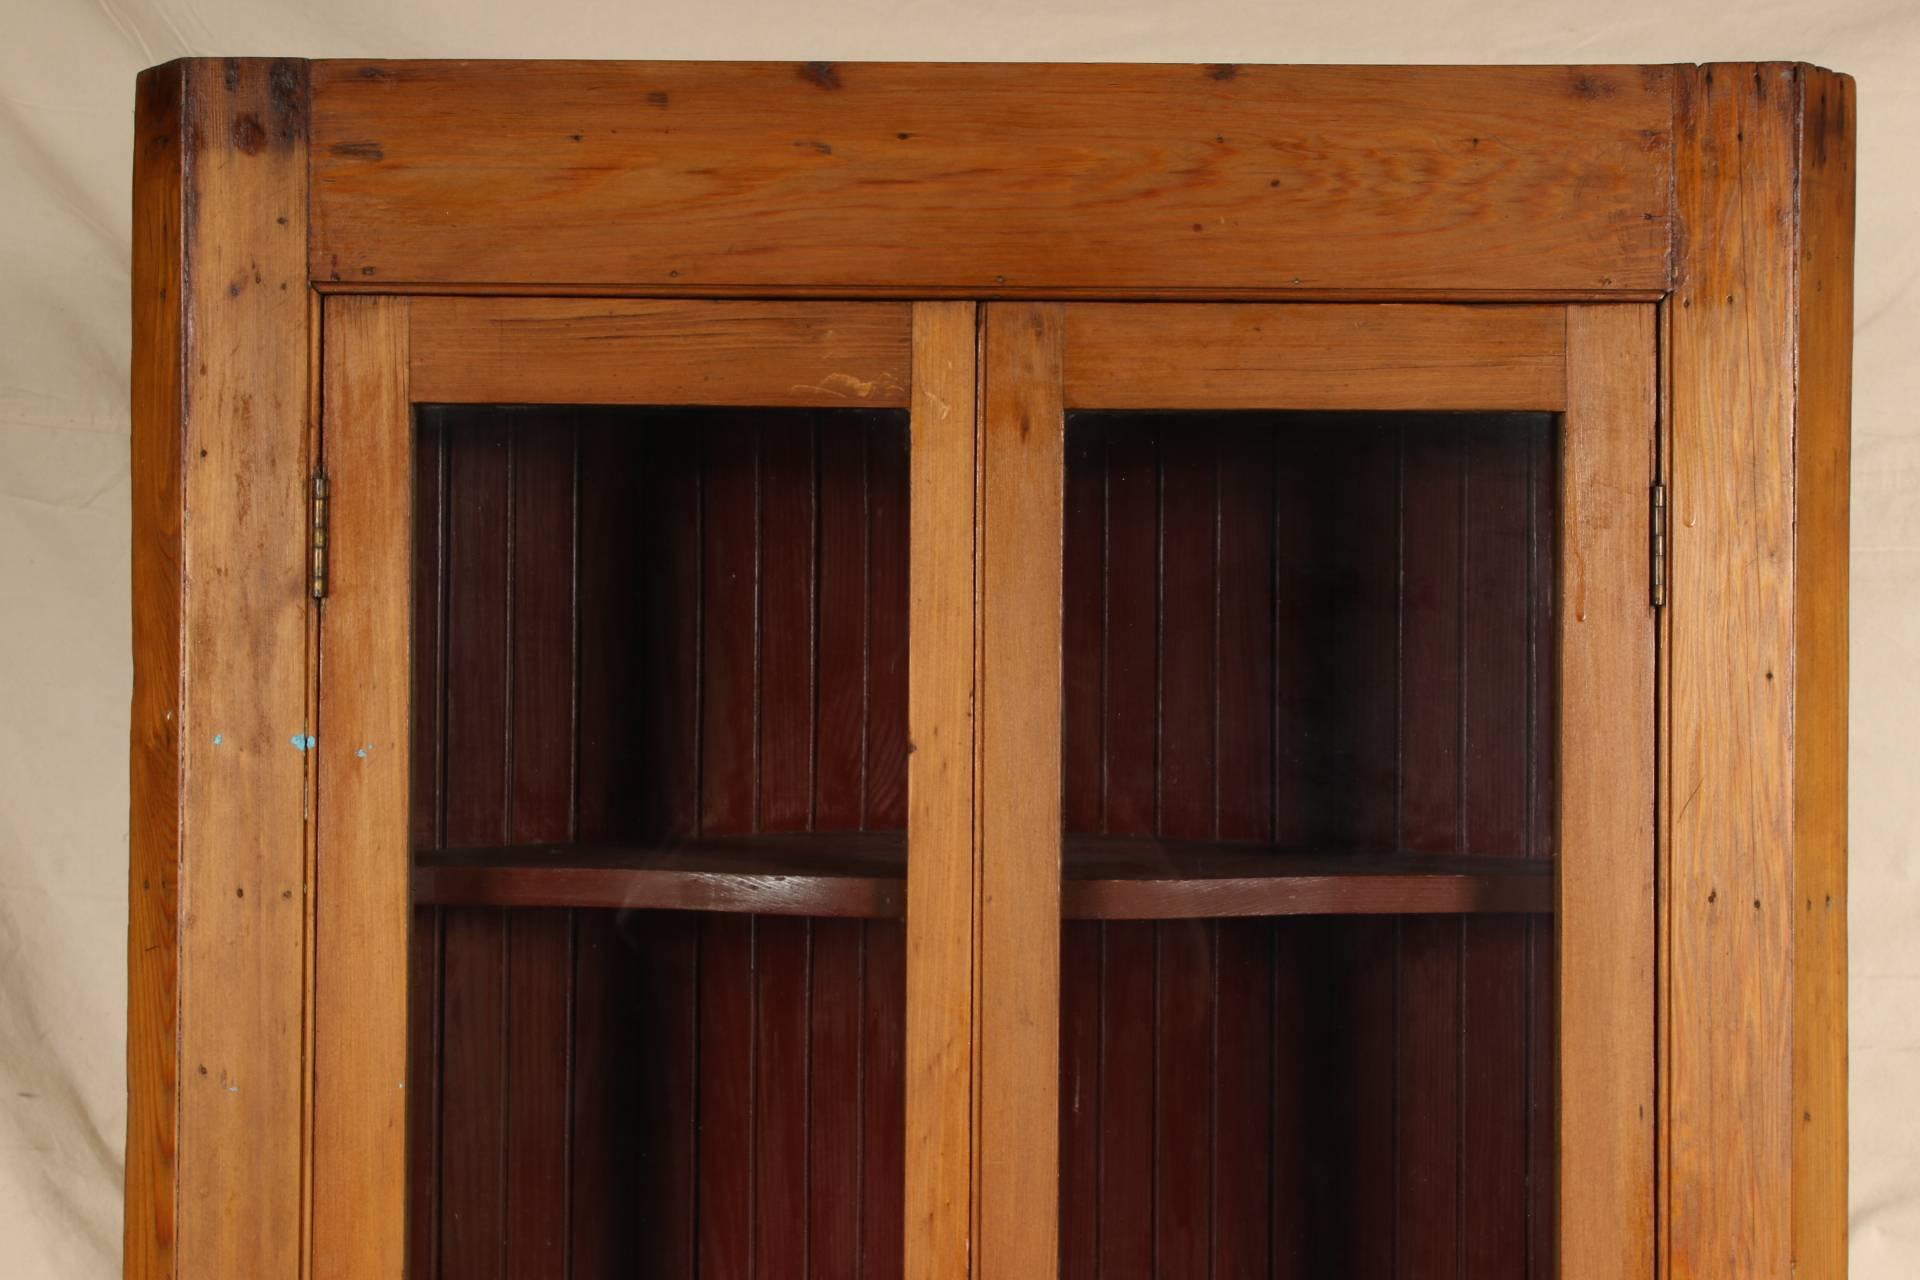 Two-part, the top cabinet with canted corners and double glazed hinged doors with a brass latch. The interior constructed of vertical planks with three shaped shelves all in barn red paint. Mounted on a lower cabinet with carved recessed double